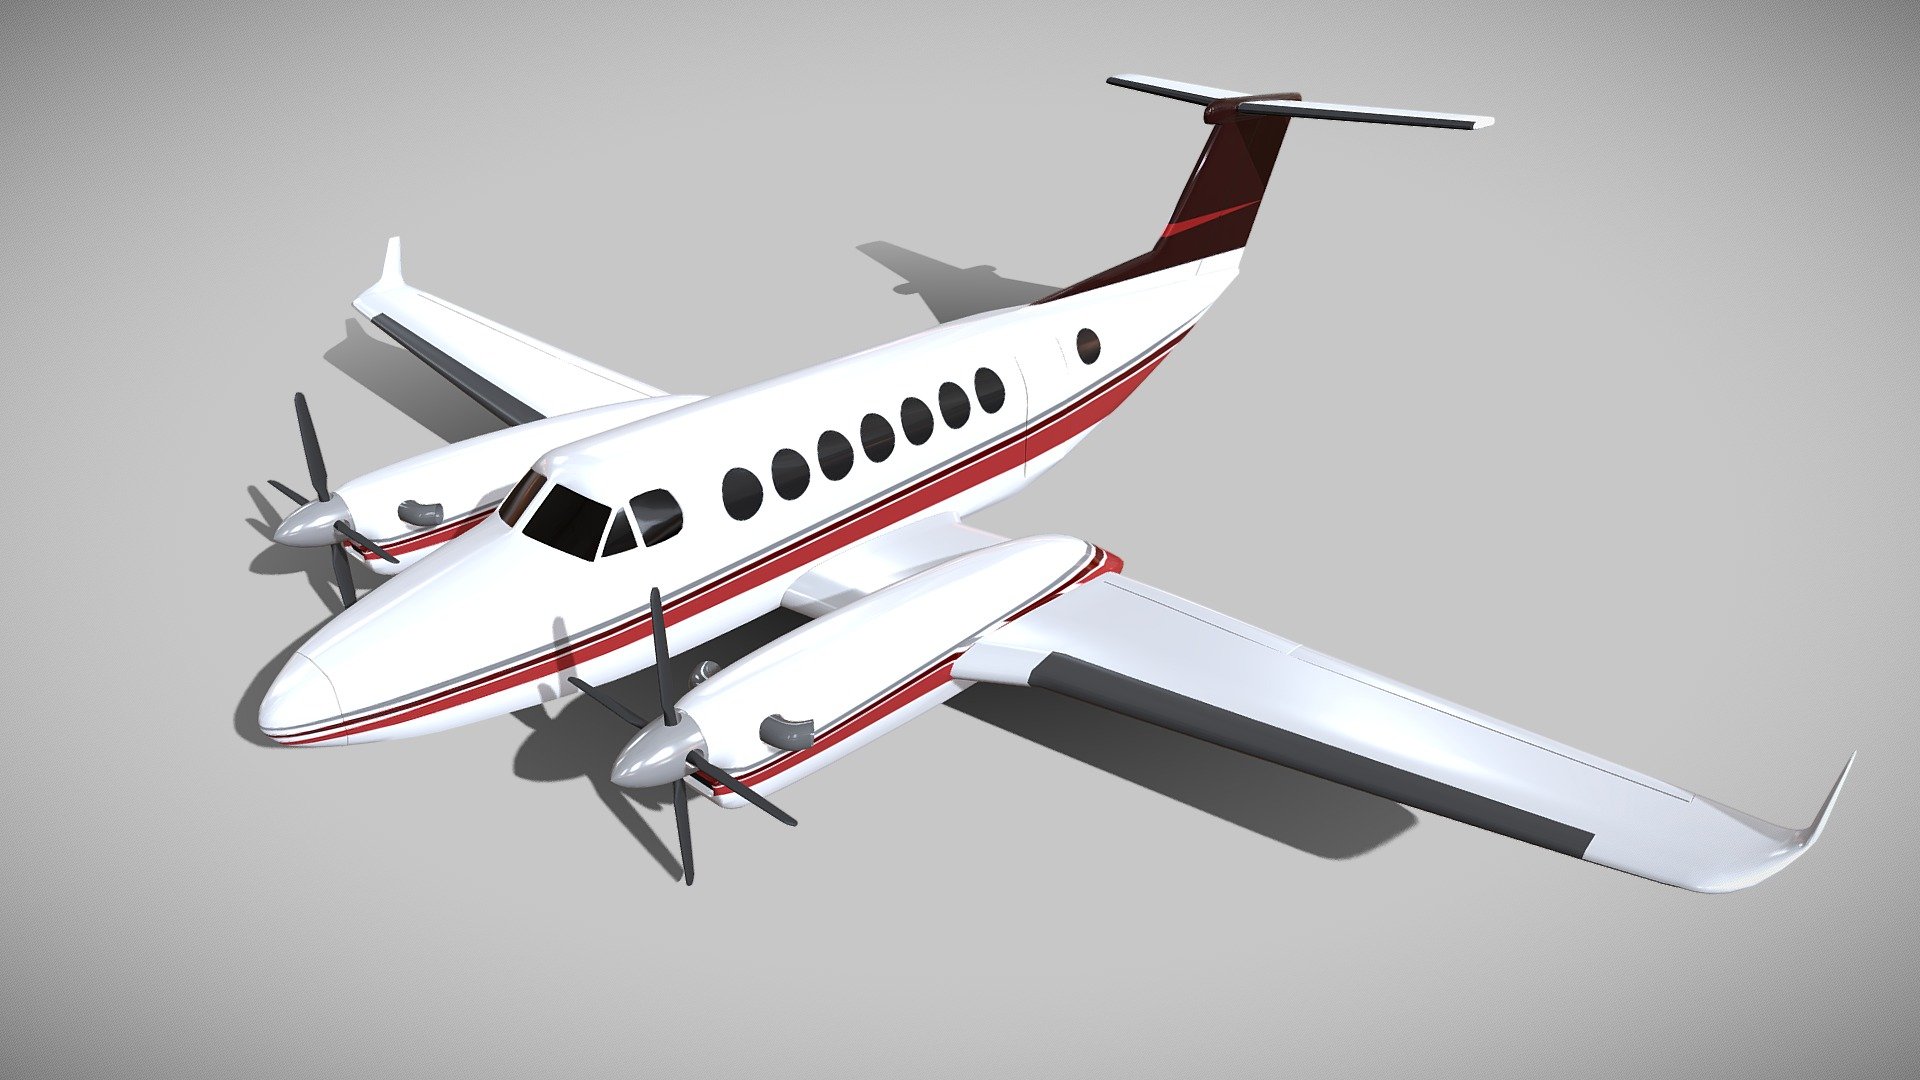 3d model created with blender3d 2.76 version.Renderings with blender internal render.There are no interior objects and no landing gears for this product.There is one texture image mapped from side view,both fuselage and engine stripes included.Texture is png 2096 x 2096 px.Texture has windows and stripes details.Doors are created from polygons attached to fuselage,but you can unlink it as rudder too.Most of the objects detached.There are elevators and rudder as polygons,but not rigged.Object rendered with subdiv 2,until my product exported with subdiv 1.Enjoy my product.

3ds file polys: 121452 verts: 40484

obj file polys: 24607 verts: 41884

Checked with GLC player - Beechcraft_kingair_350 airplane - Buy Royalty Free 3D model by koleos3d 3d model